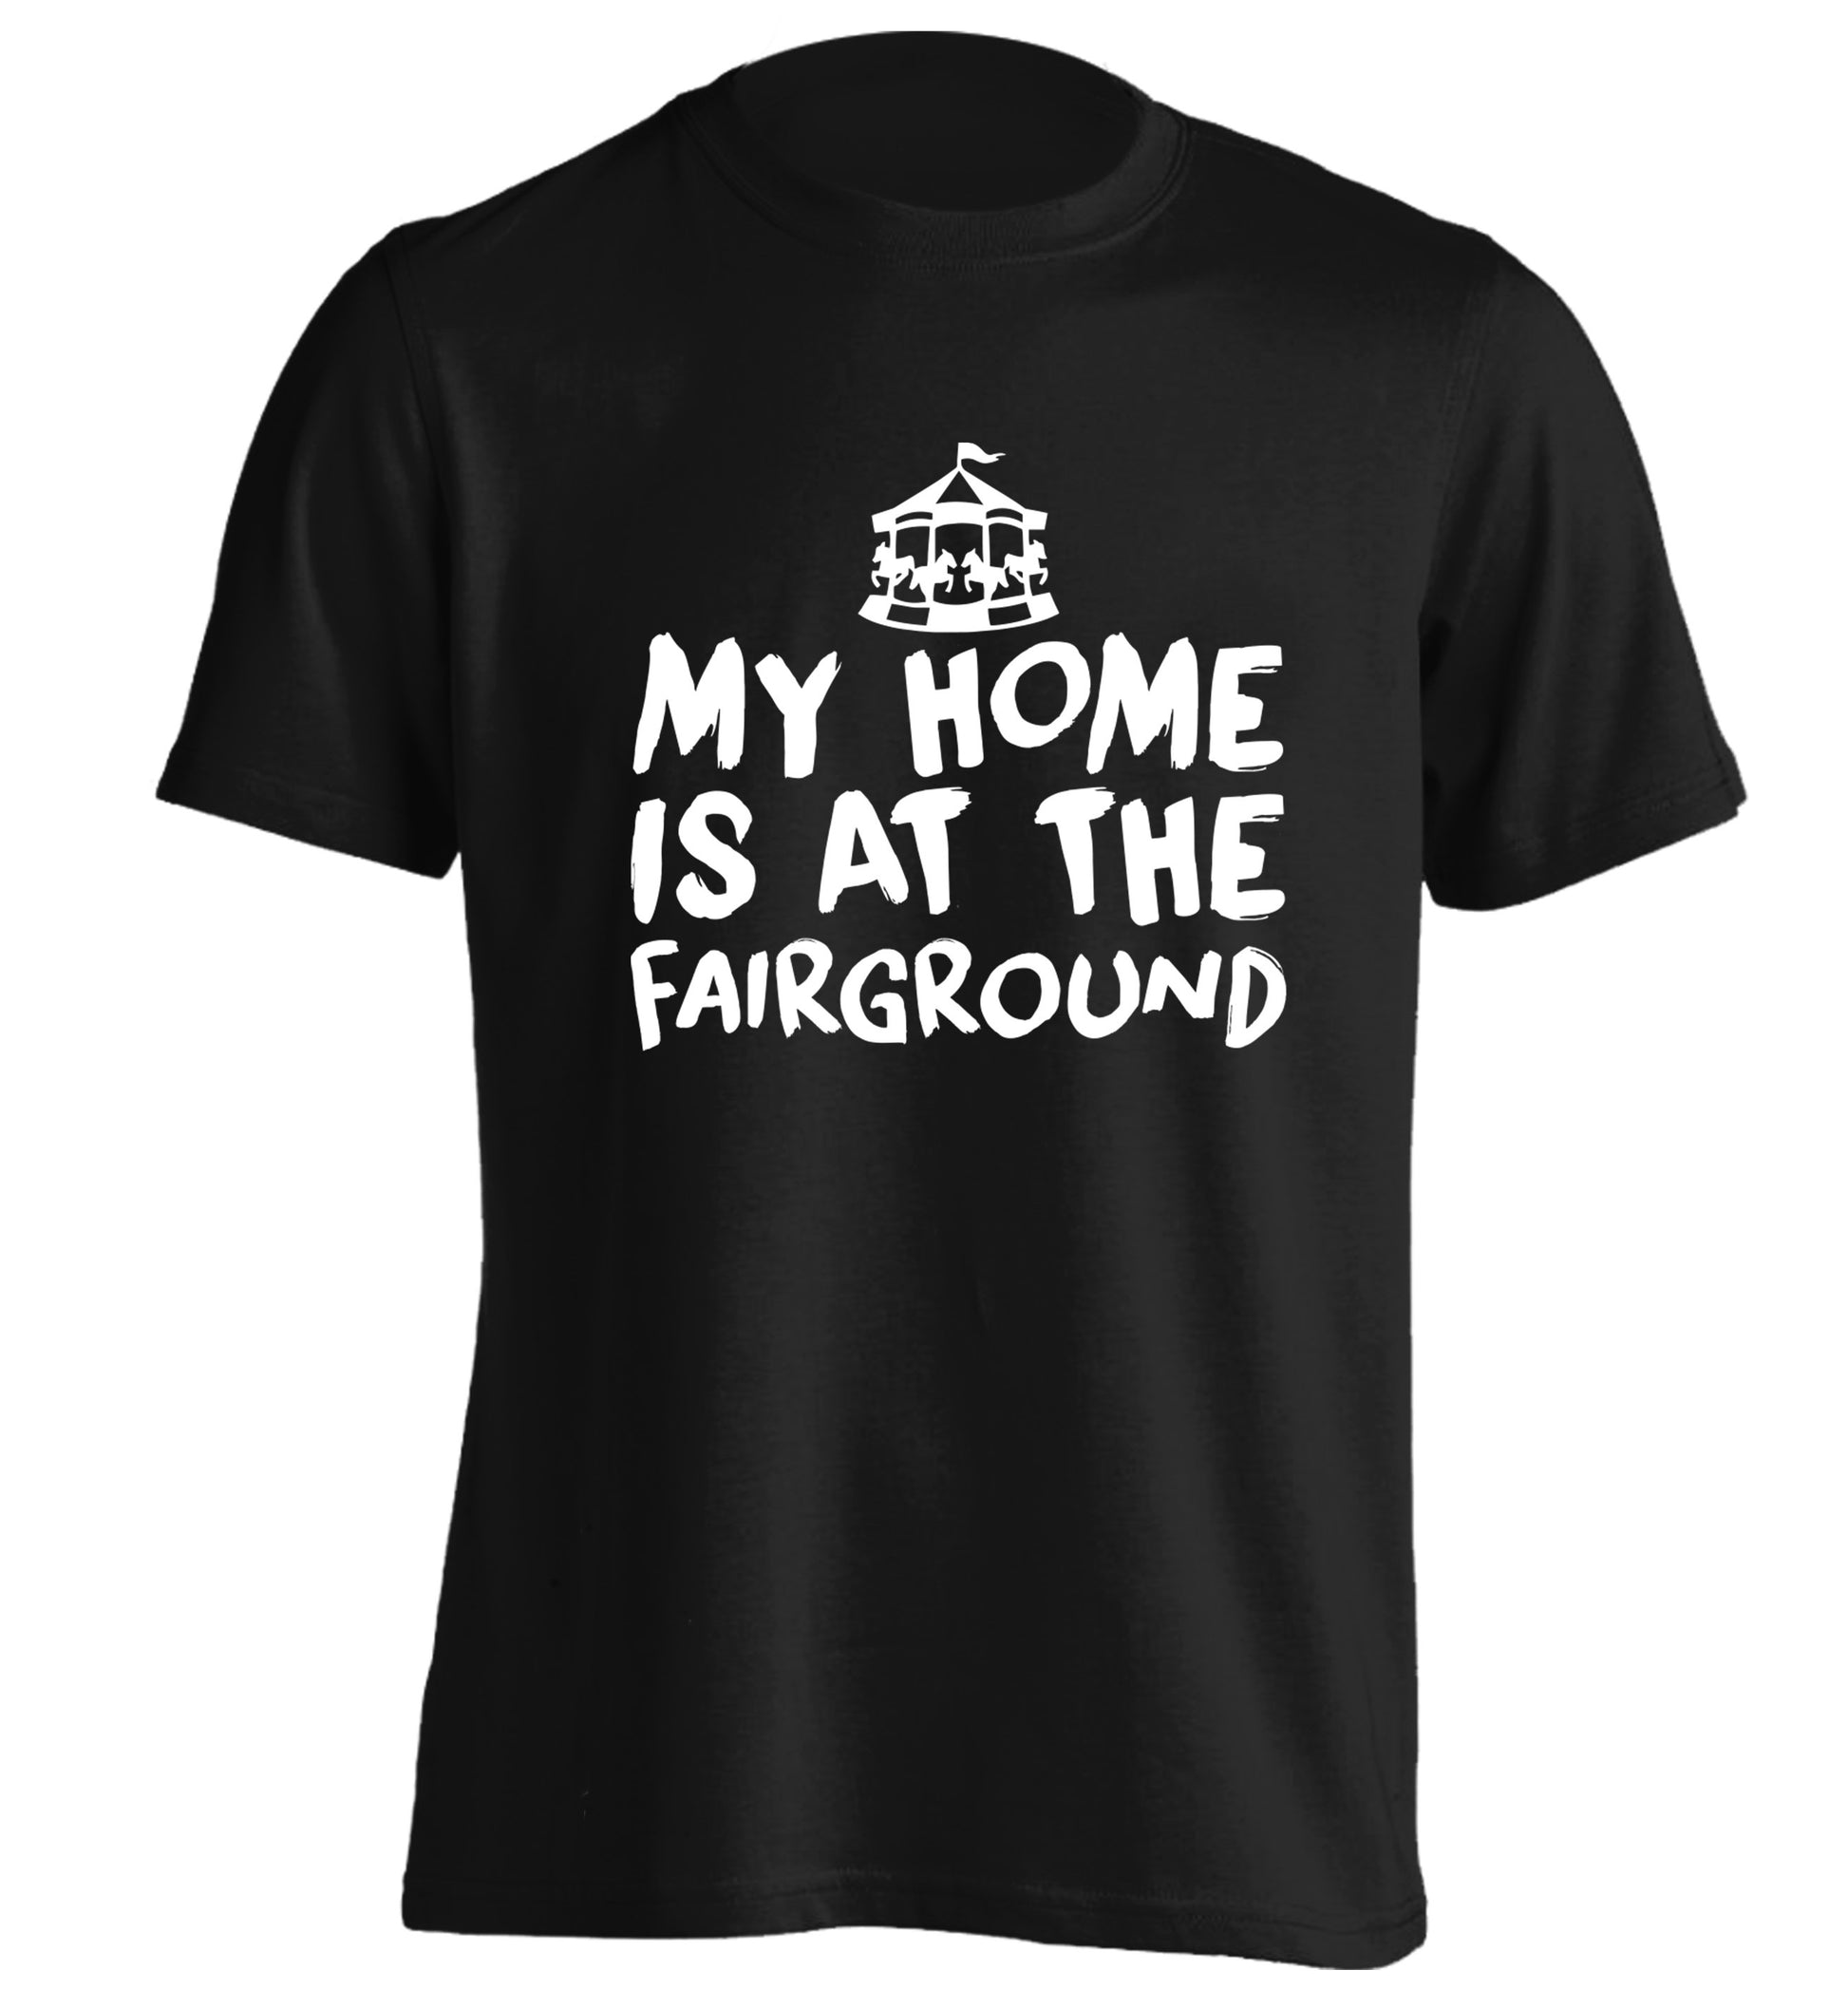 My home is at the fairground adults unisex black Tshirt 2XL